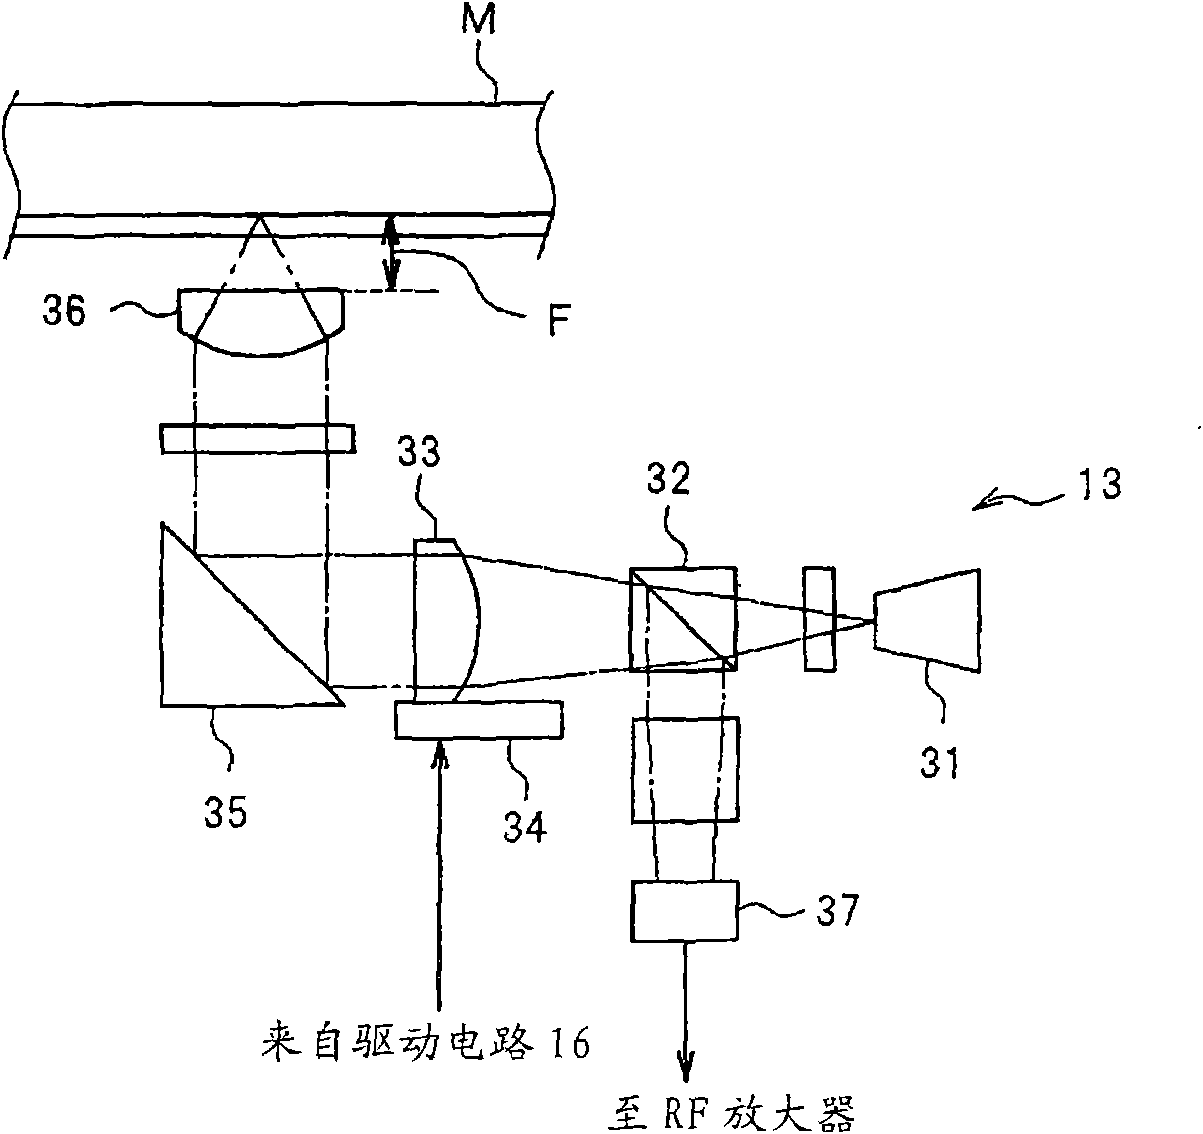 Optical disc apparatus, method of controlling the same, and information storage medium